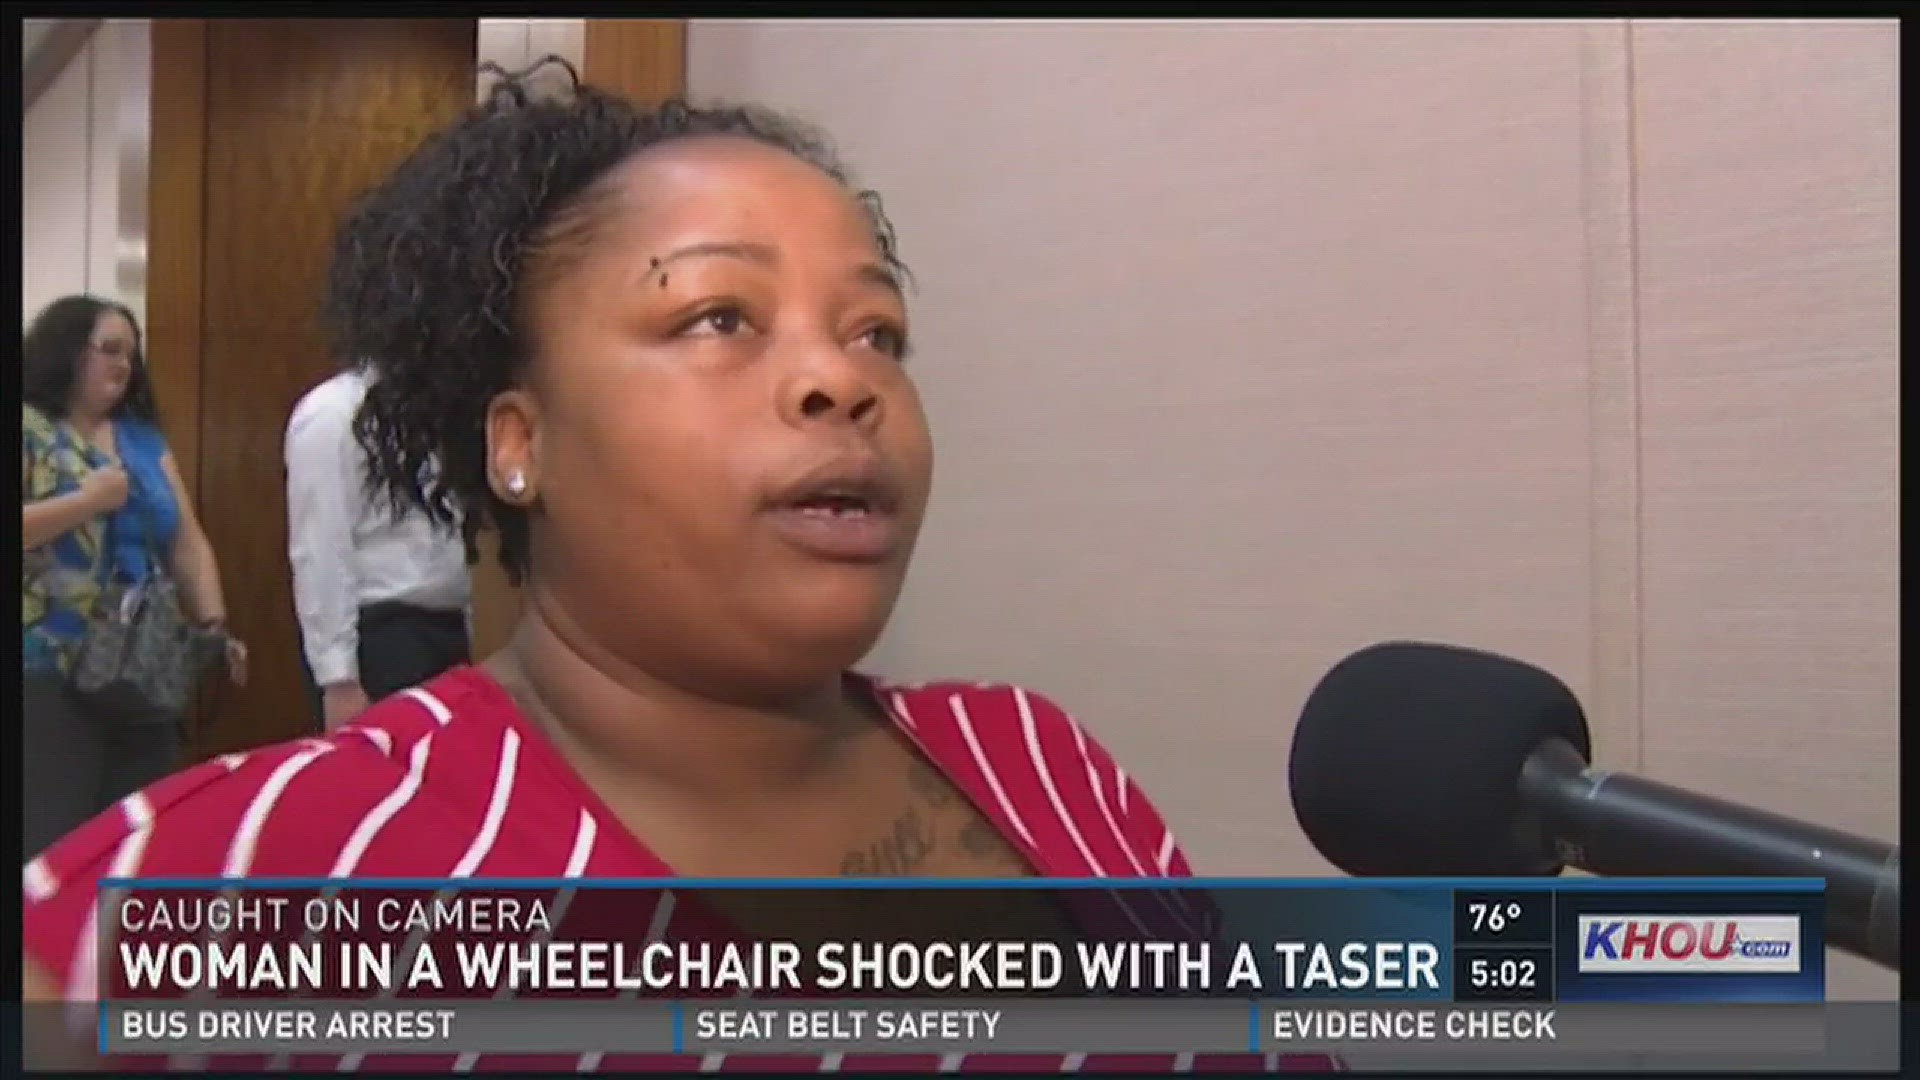 The Harris County Sheriff's Office has launched an internal investigation after a woman in a wheelchair, 36 year-old Sheketha Holman, was shocked with a Taser.